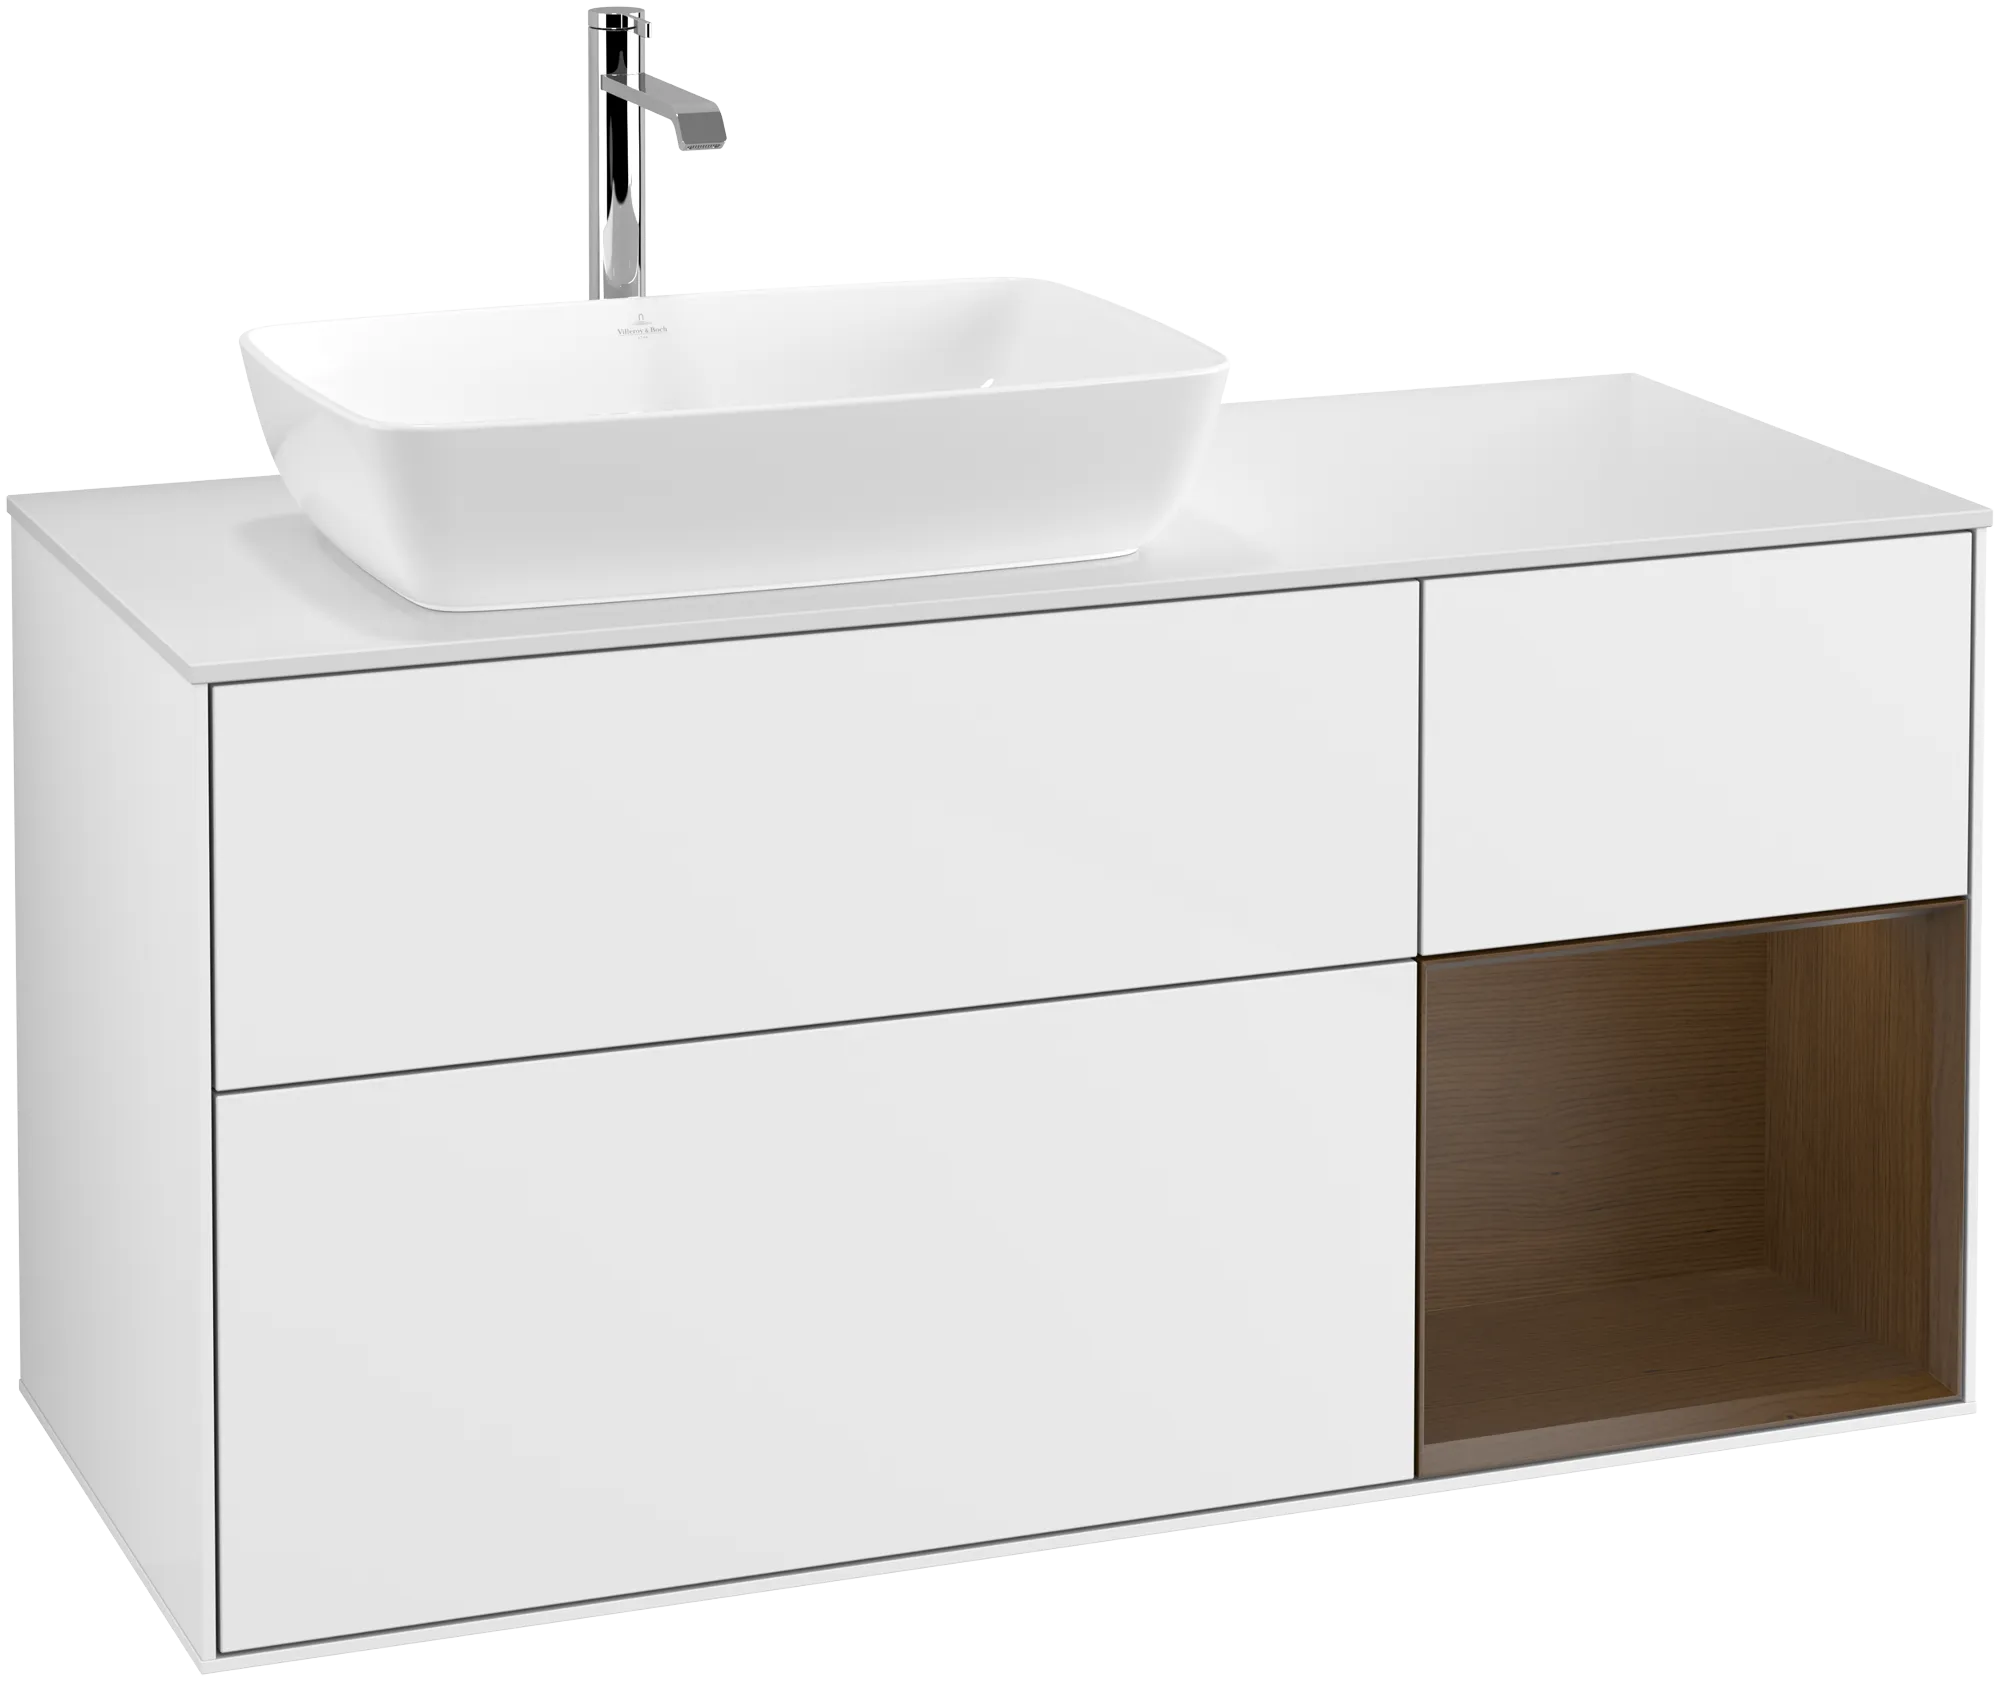 Obrázek VILLEROY BOCH Finion Vanity unit, with lighting, 3 pull-out compartments, 1200 x 603 x 501 mm, Glossy White Lacquer / Walnut Veneer / Glass White Matt #G811GNGF